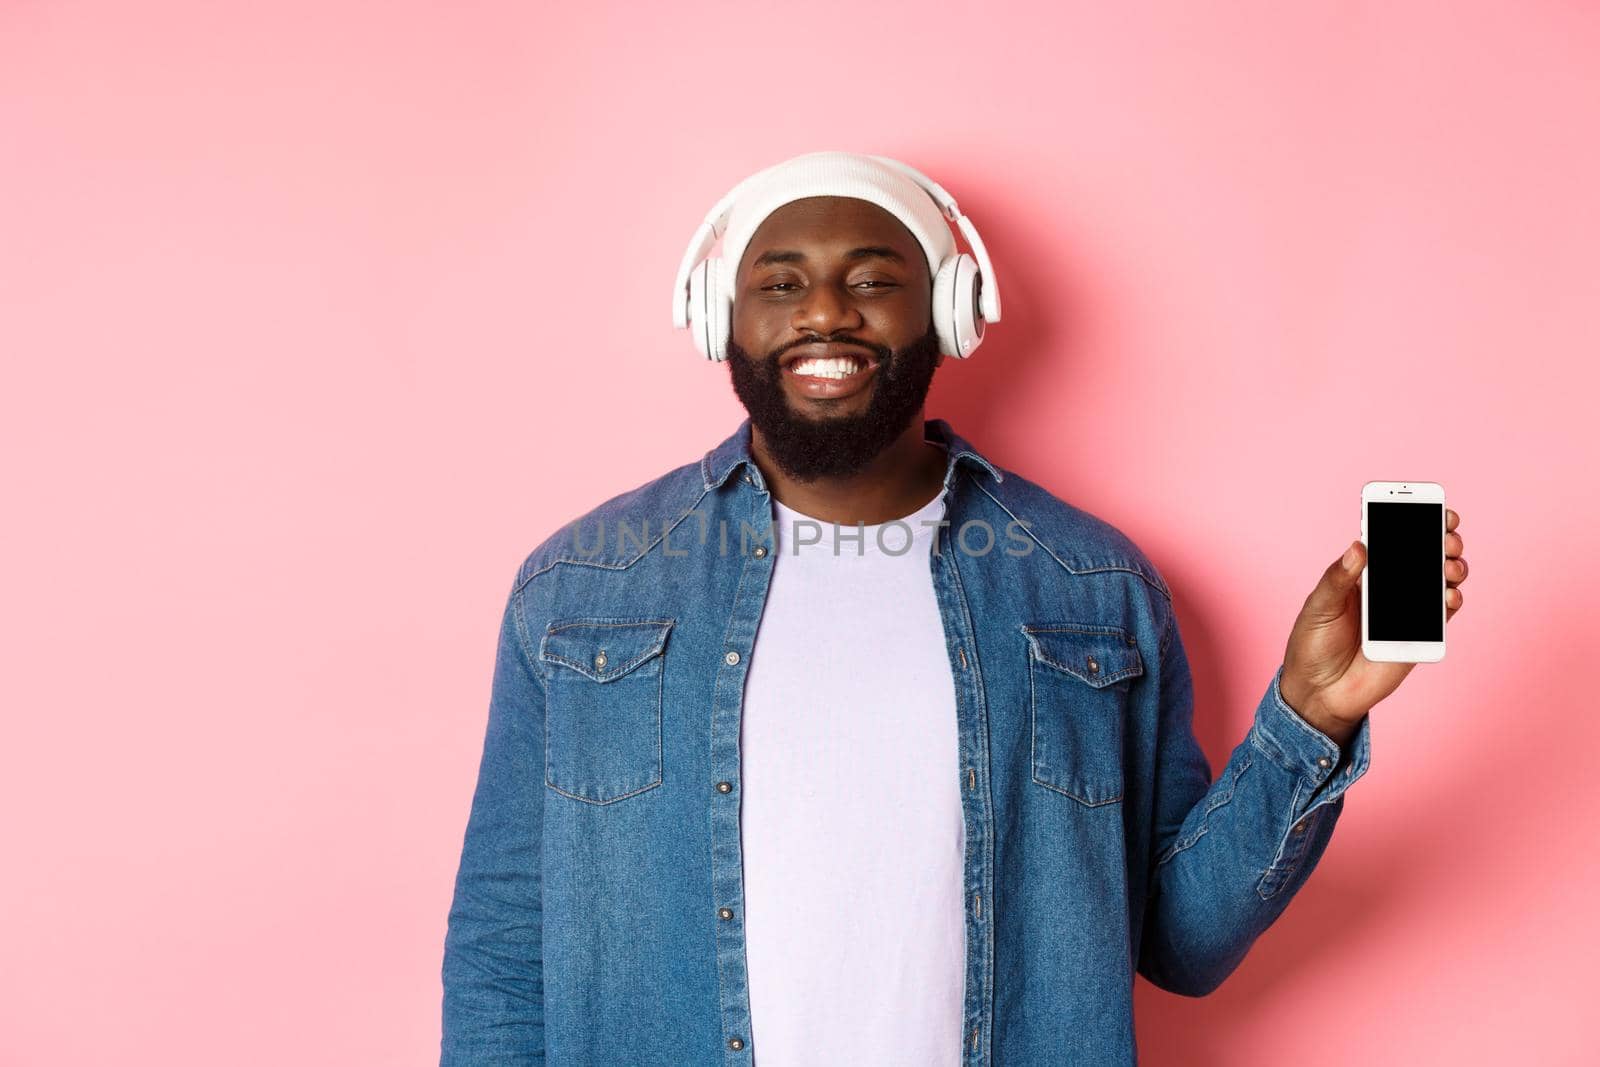 Happy hipster guy listening music on headphones and showing mobile screen, smiling satisfied, standing over pink background.